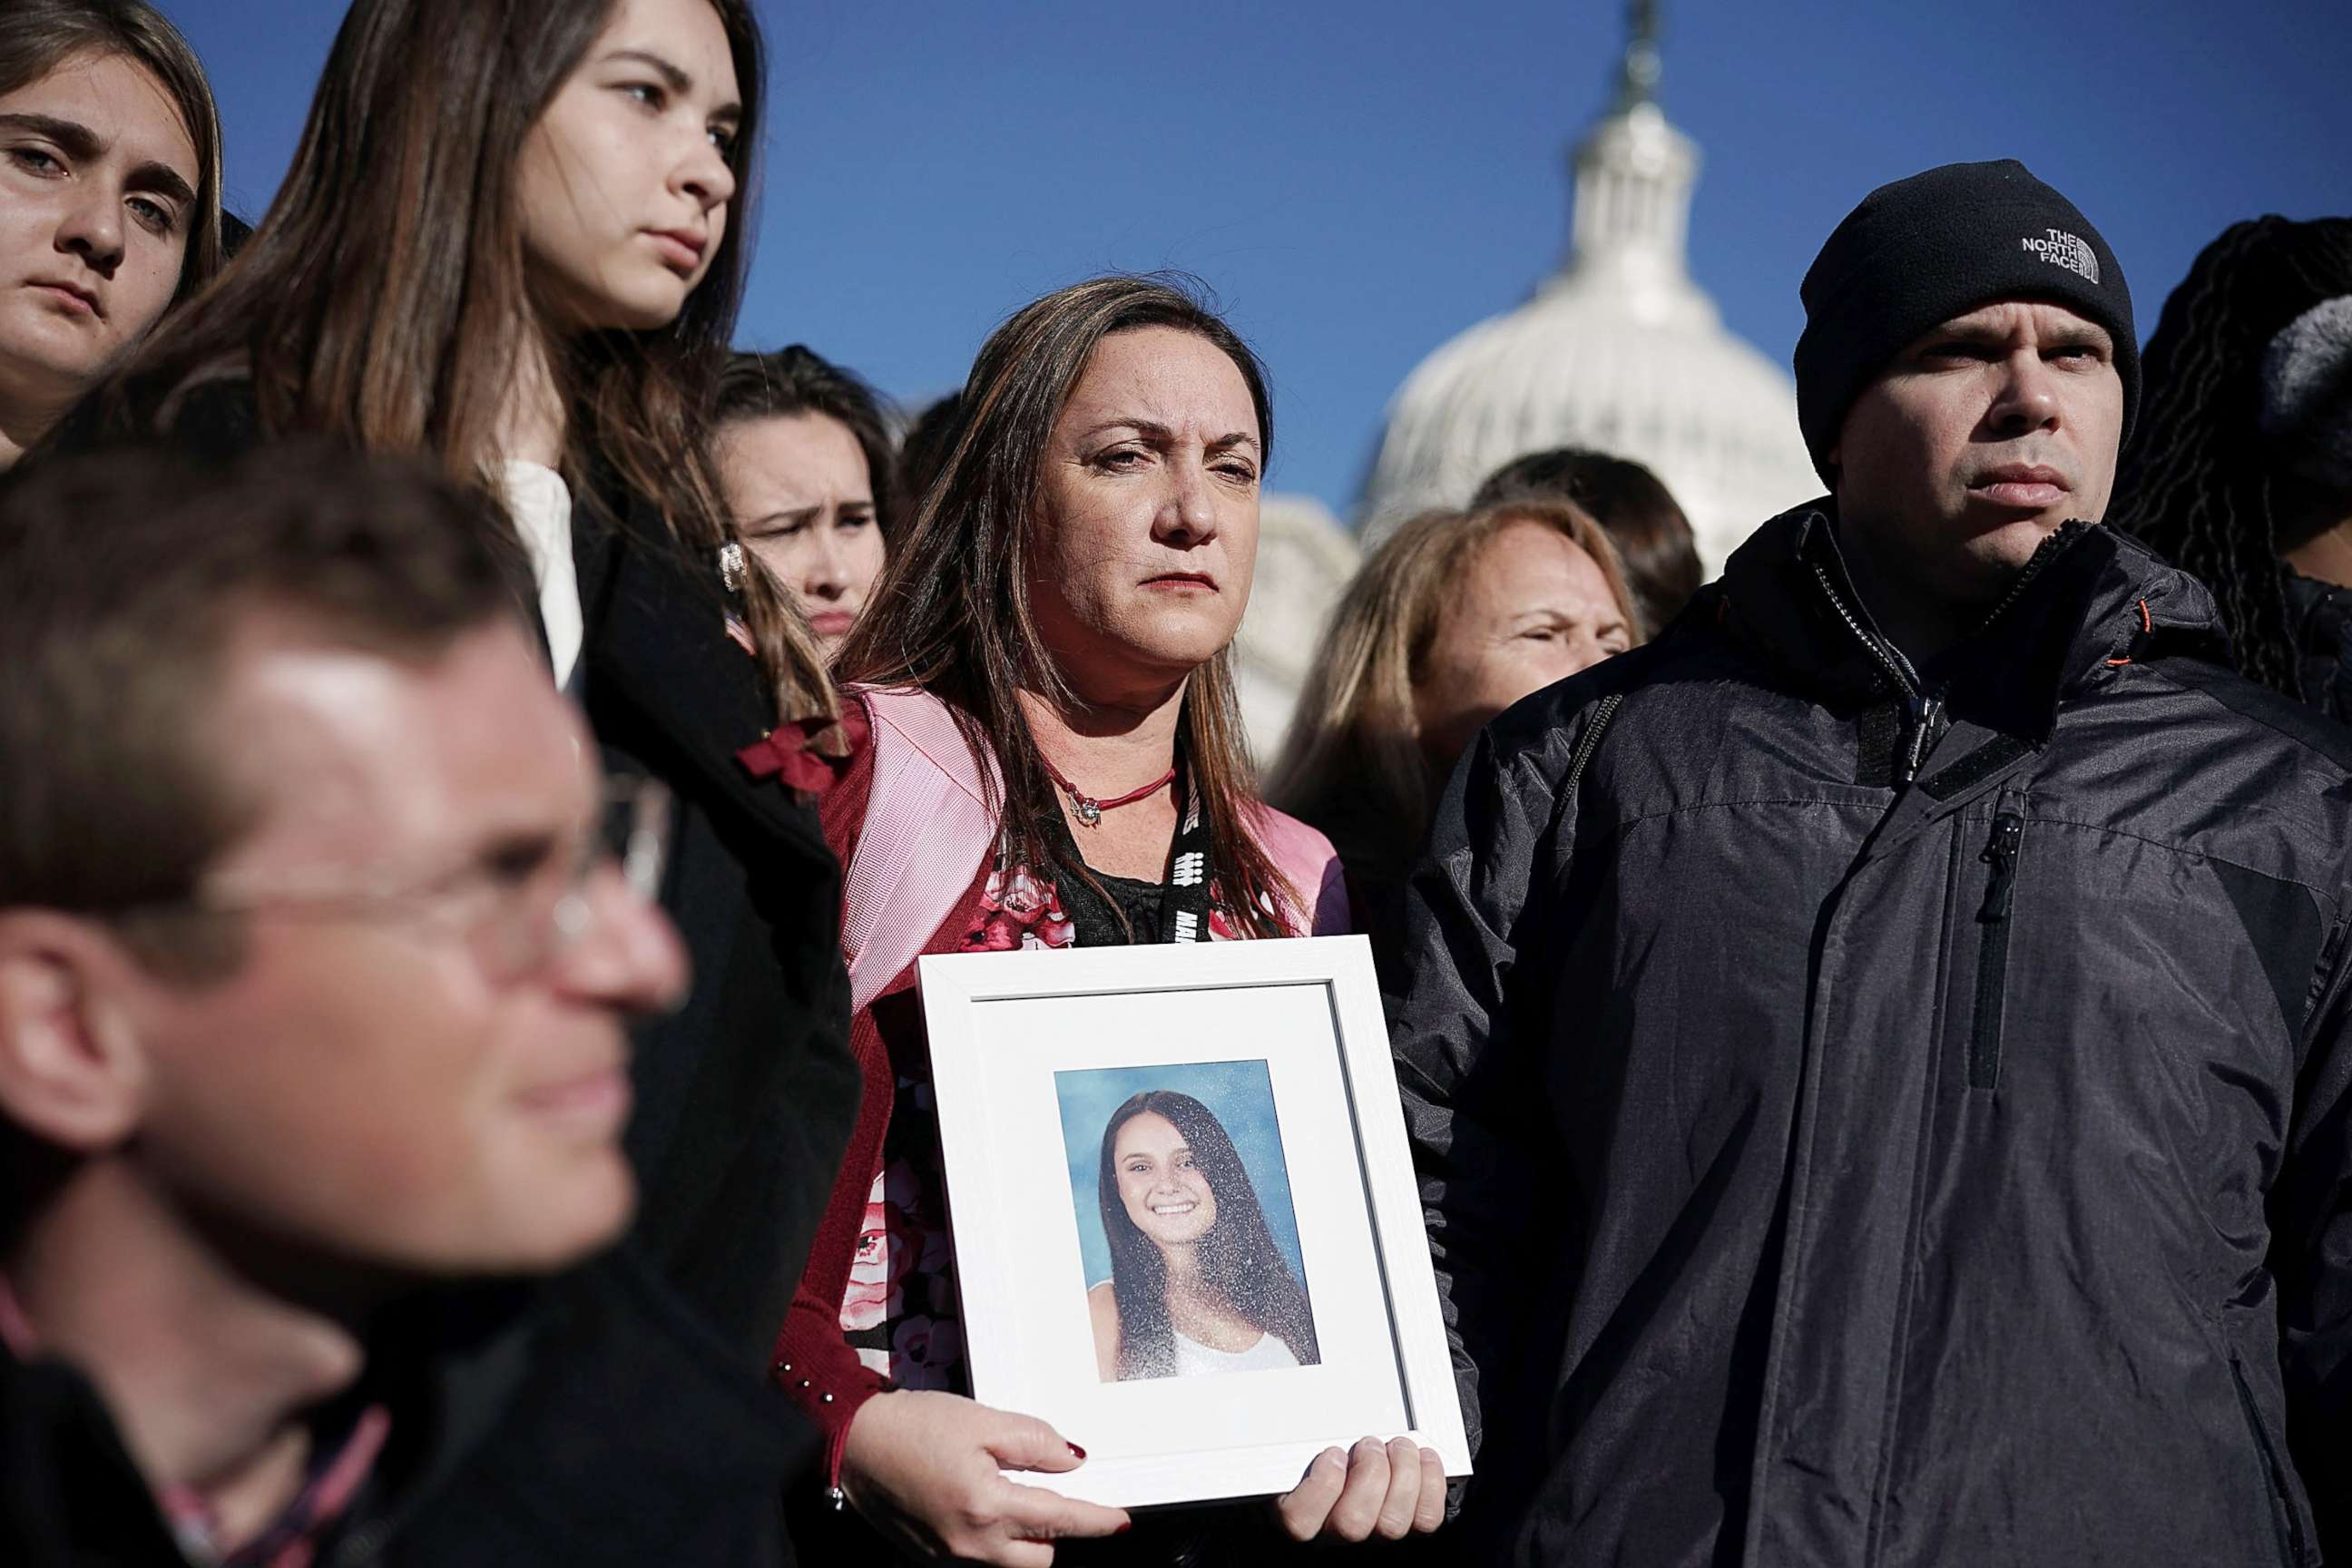 PHOTO: Lori Alhadeff and her husband Ilan Alhadeff right, hold a picture of their daughter Alyssa Alhadeff, a Marjory Stoneman Douglas High School shooting victim, during a news conference on gun control in Washington, D.C., March 23, 2018.